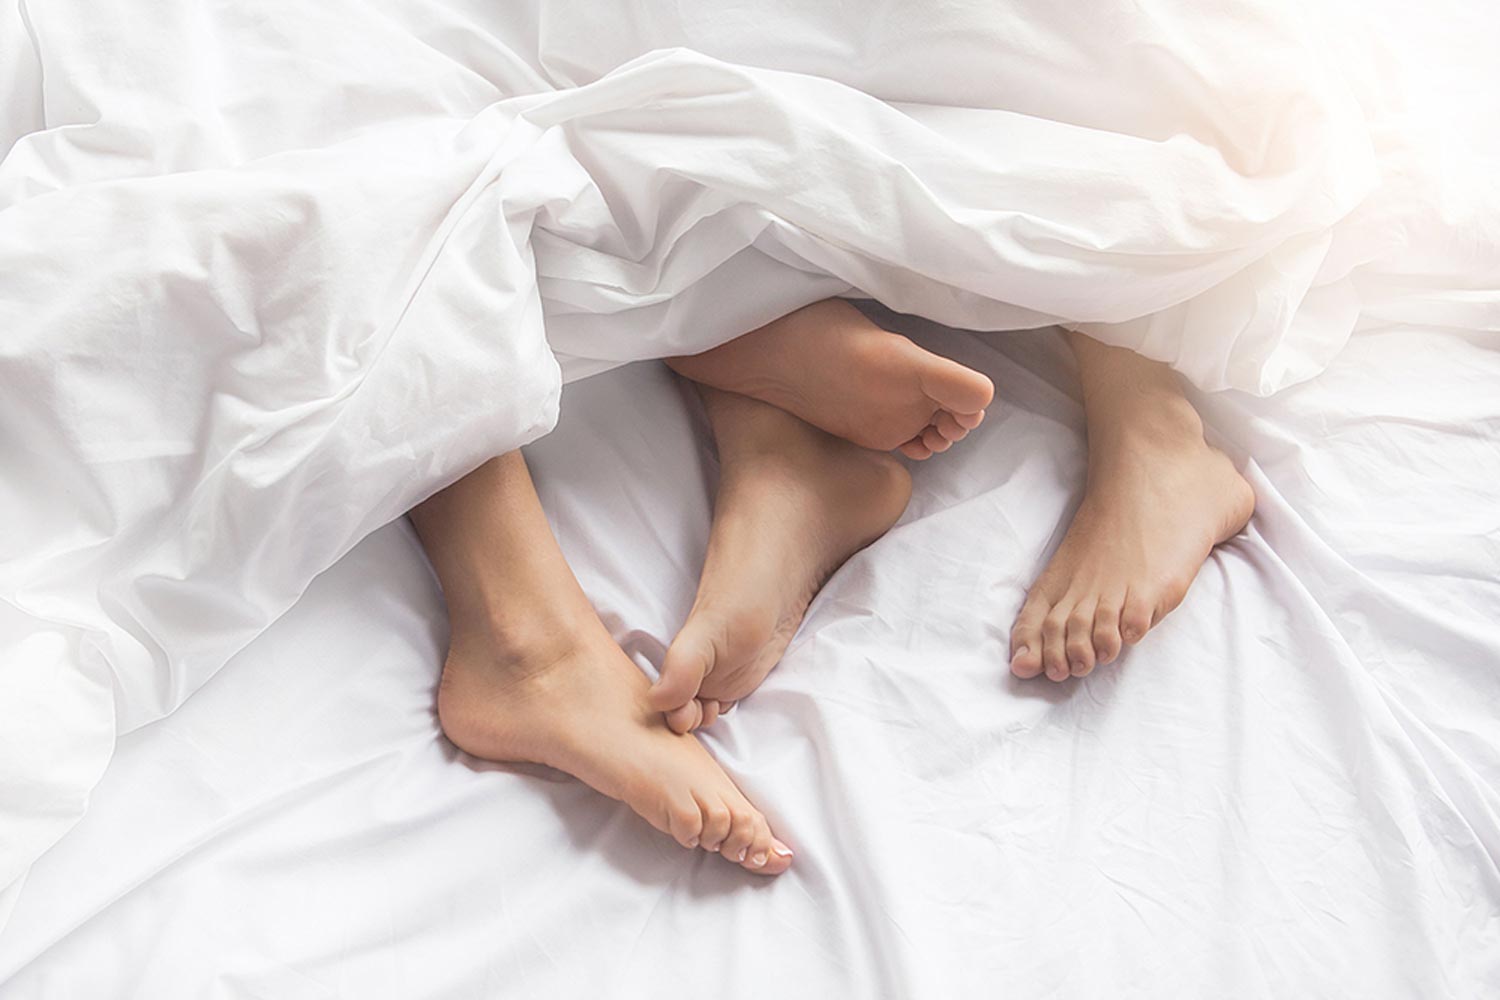 A couple's feet in bed hanging out of the sheets